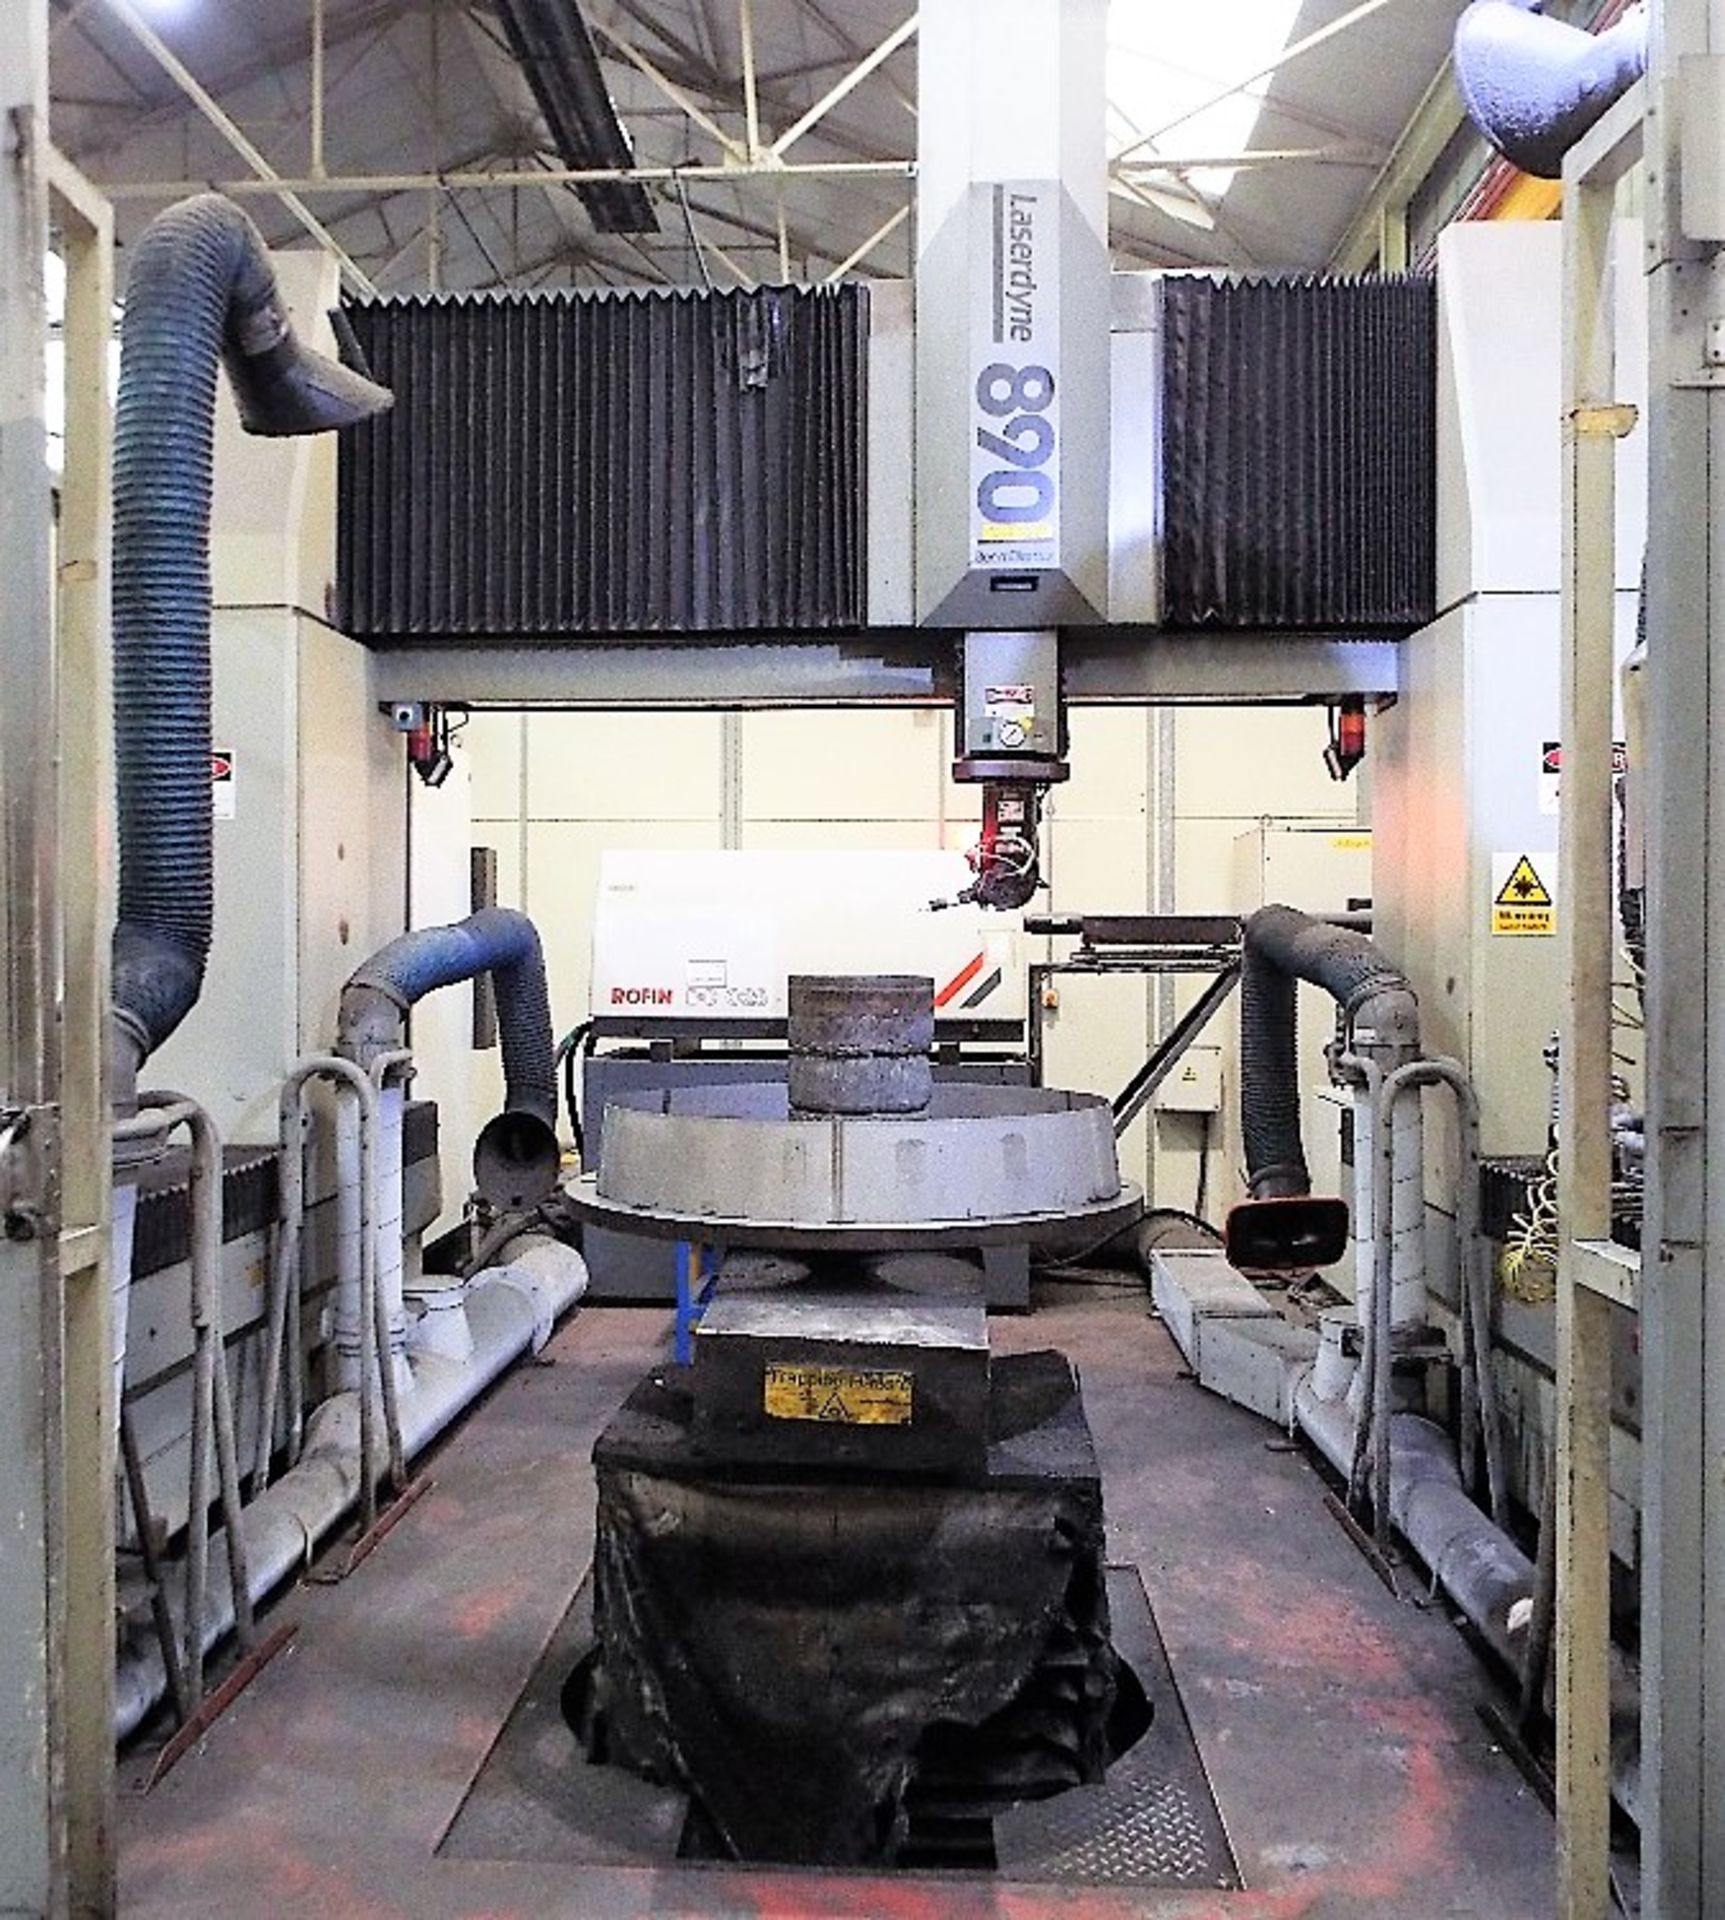 Lumonics Laserdyne 890 Beam Director Multiaxis Laser System cw Dust Extractor and Chilling Unit.